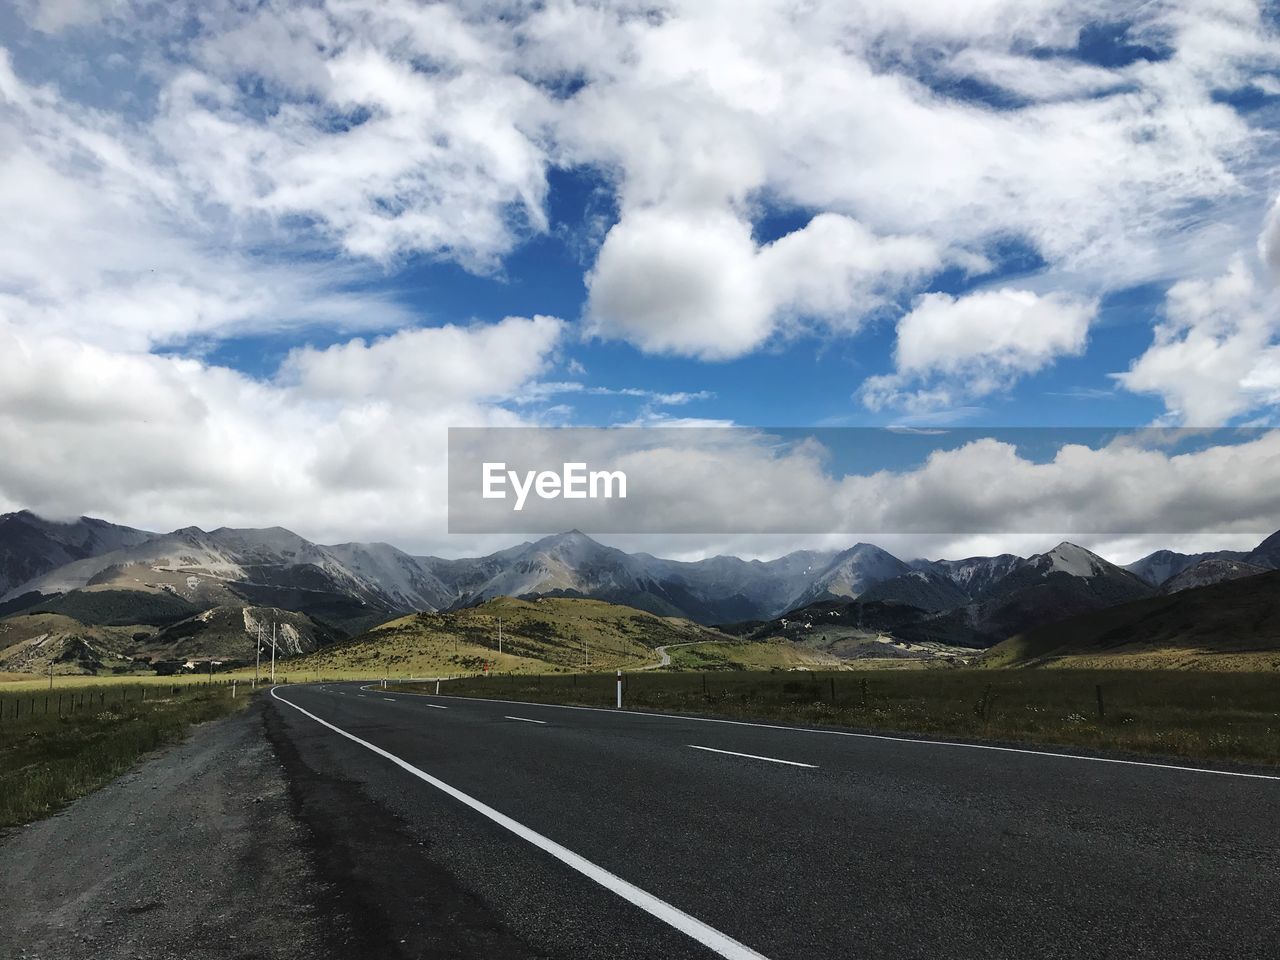 EMPTY ROAD BY MOUNTAINS AGAINST CLOUDY SKY